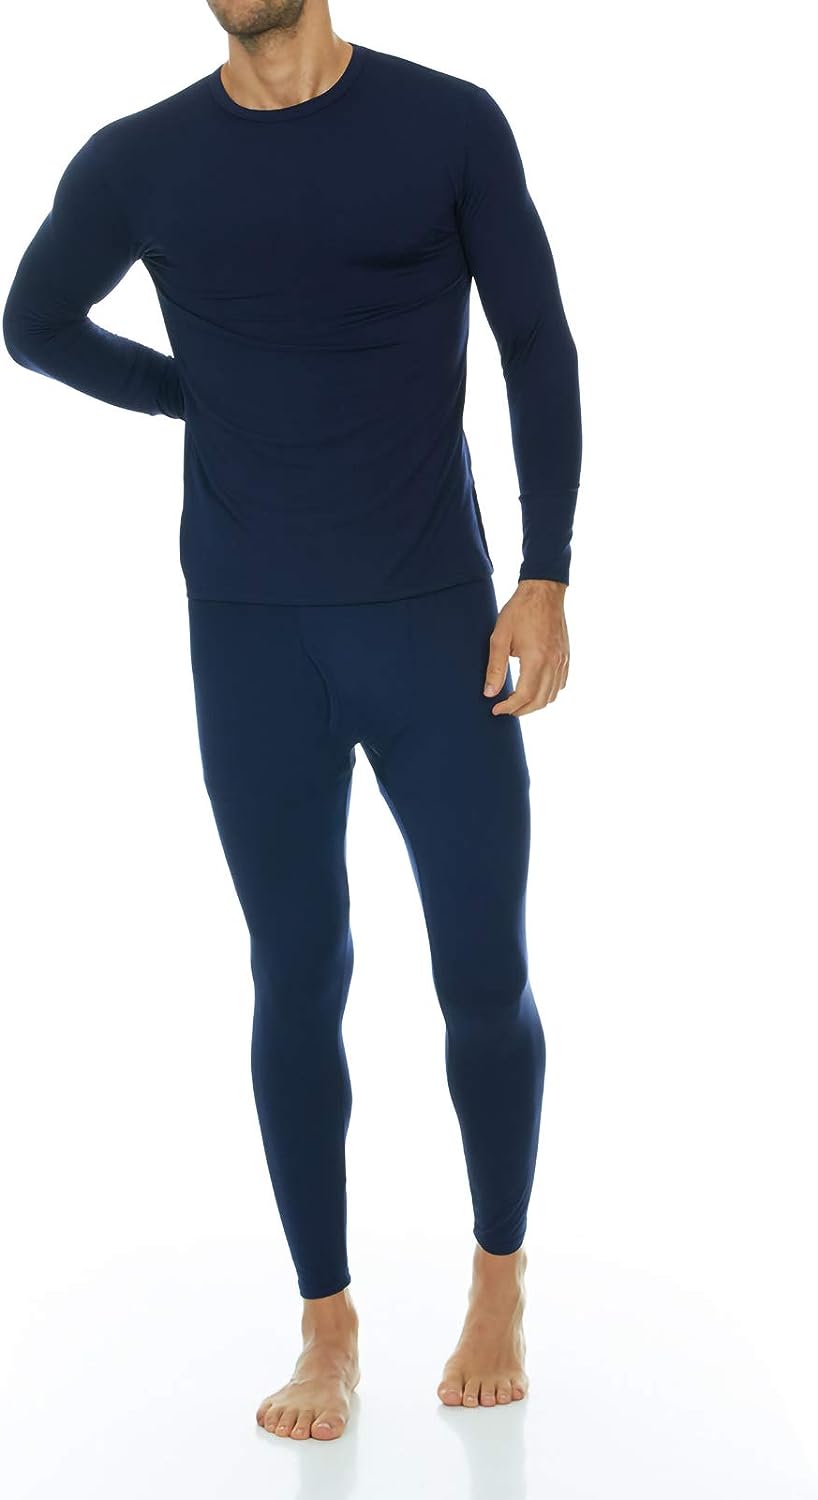 How to Wear Thermal Underwear?– Thermajohn